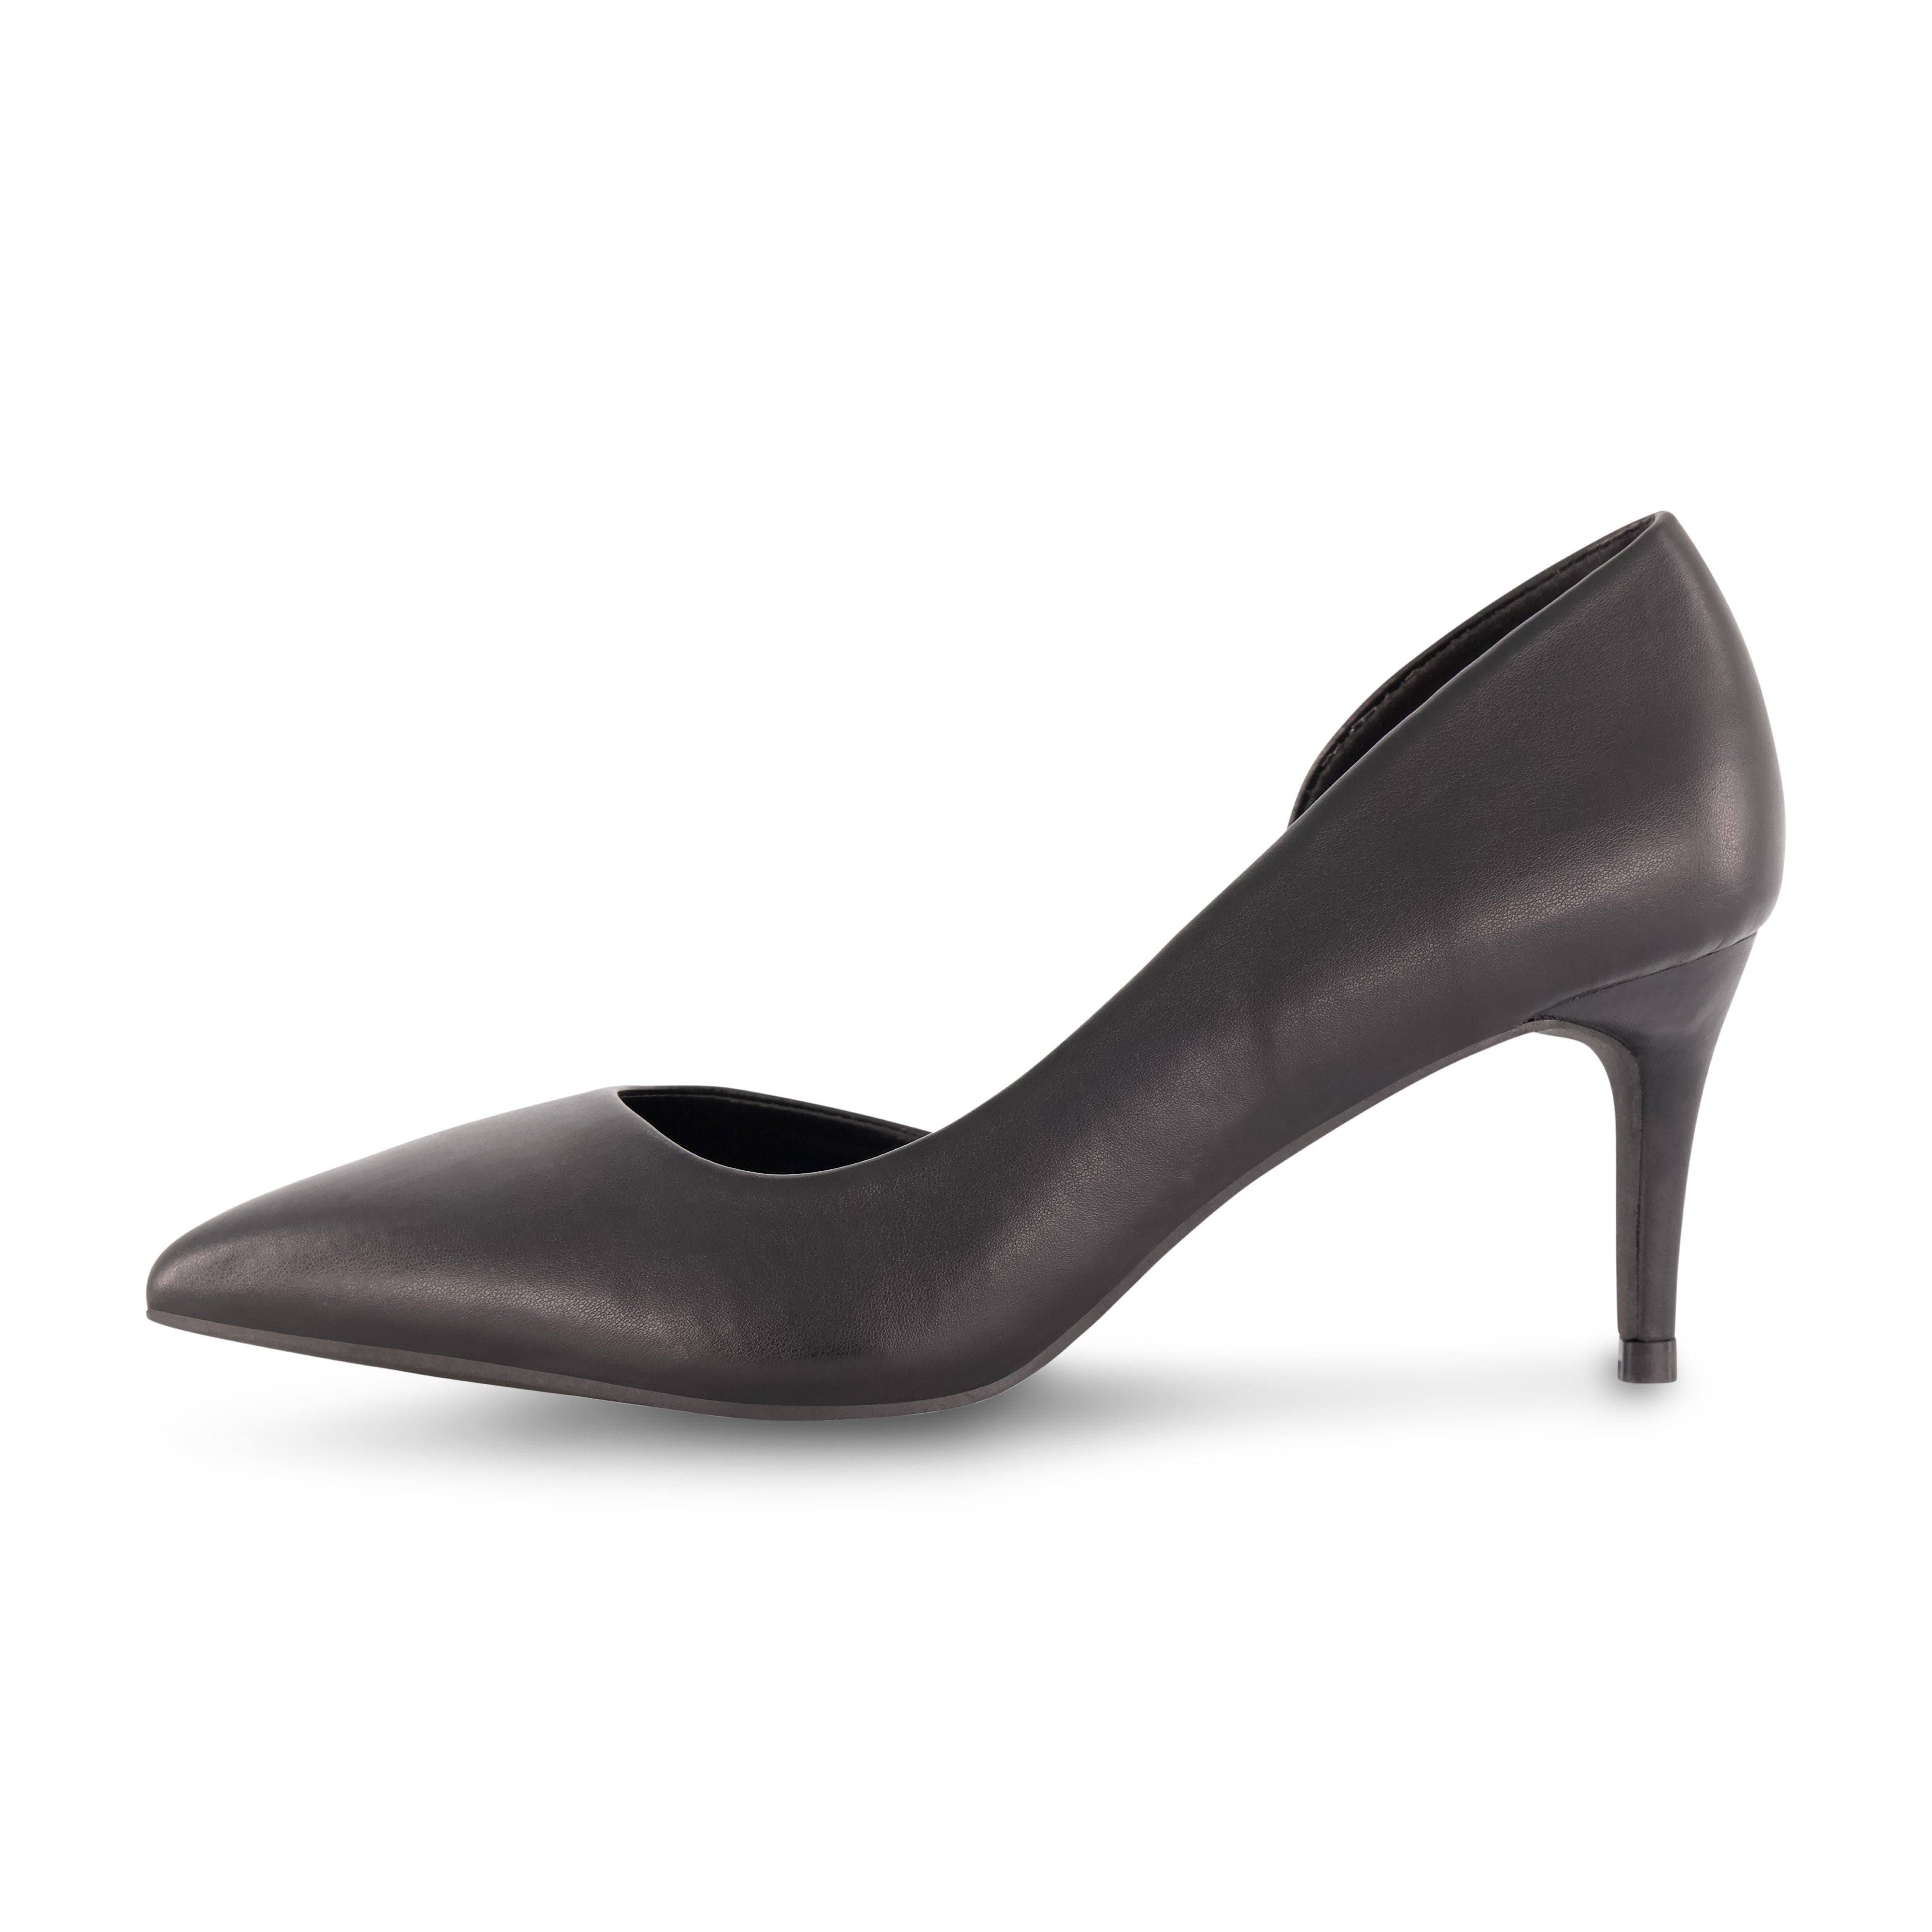 Comfortable Vegan Leather Pump with Memory Foam Insole for Black Simple Heels | Image